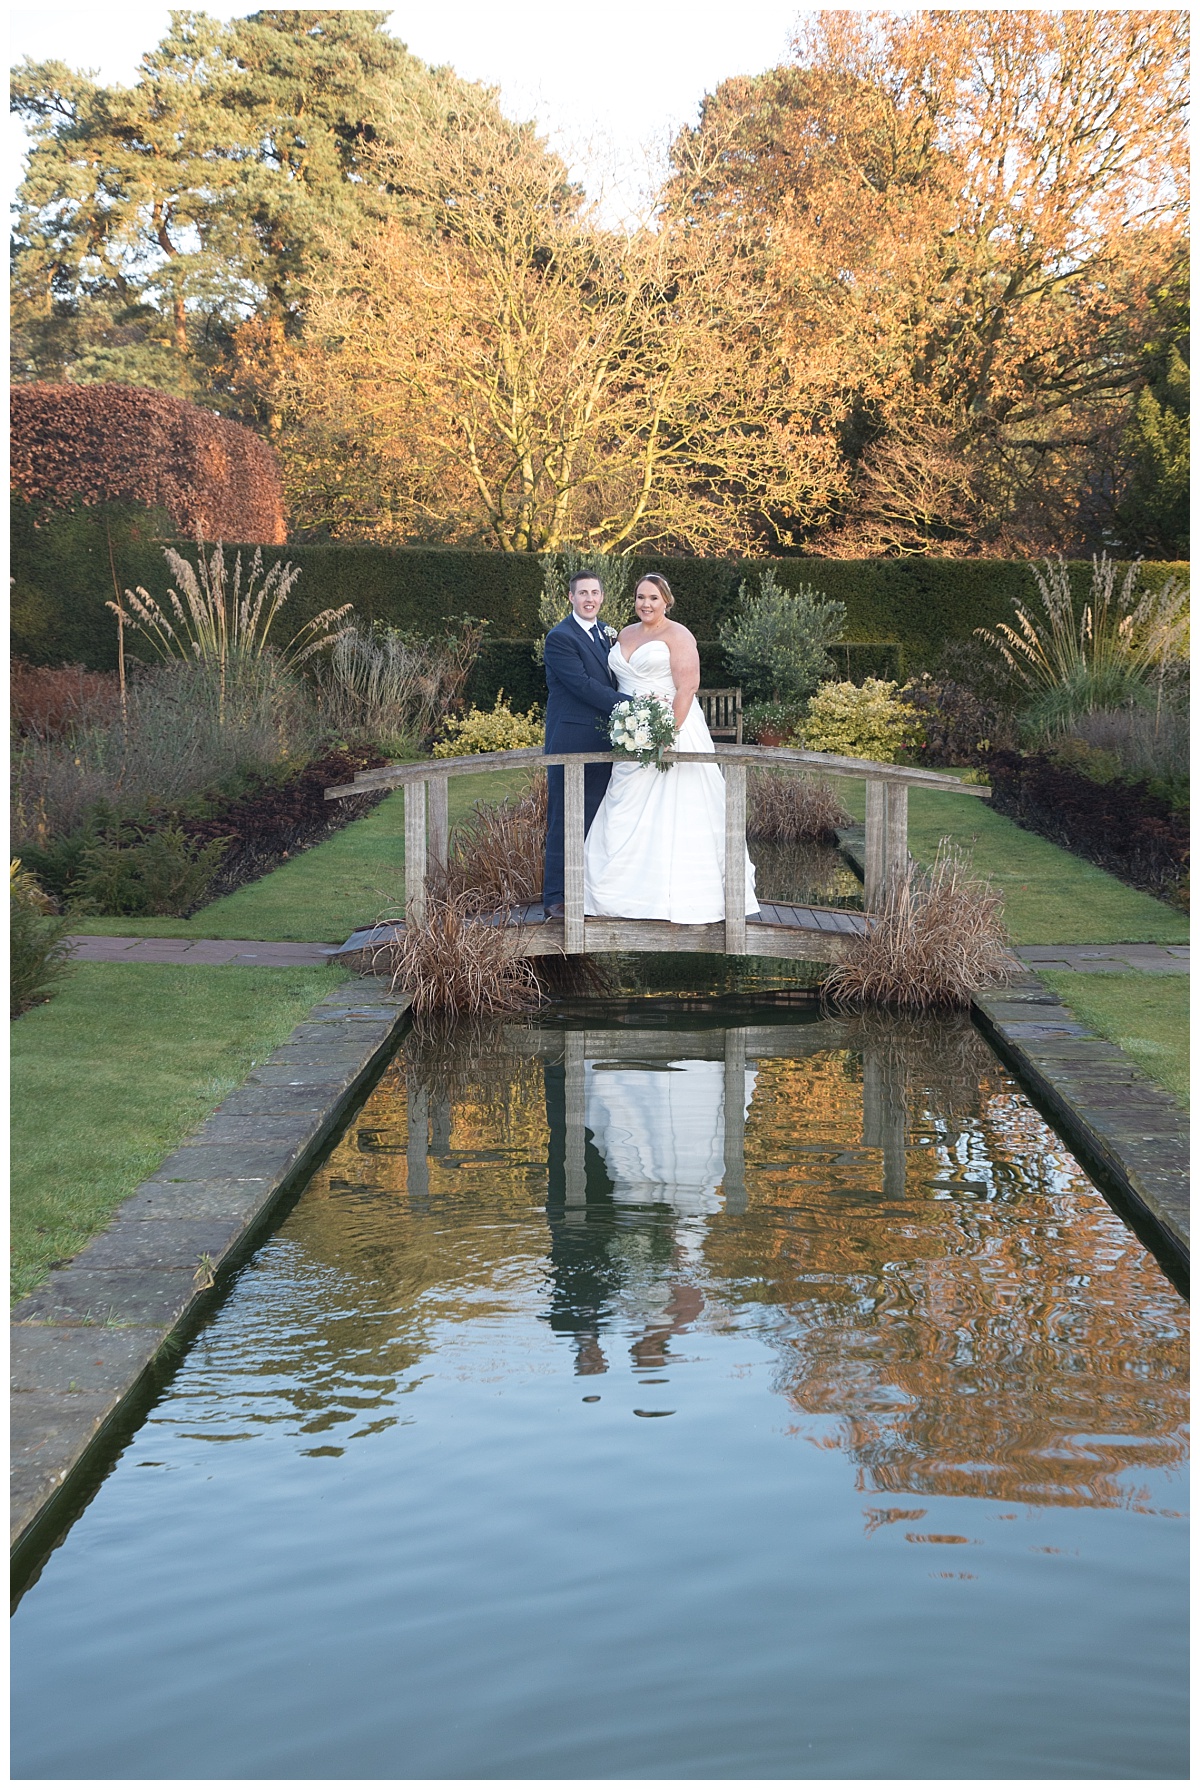 Wedding Photography Manchester - Lorna and Vinny's Abbeywood Estate and Gardens Wedding 76